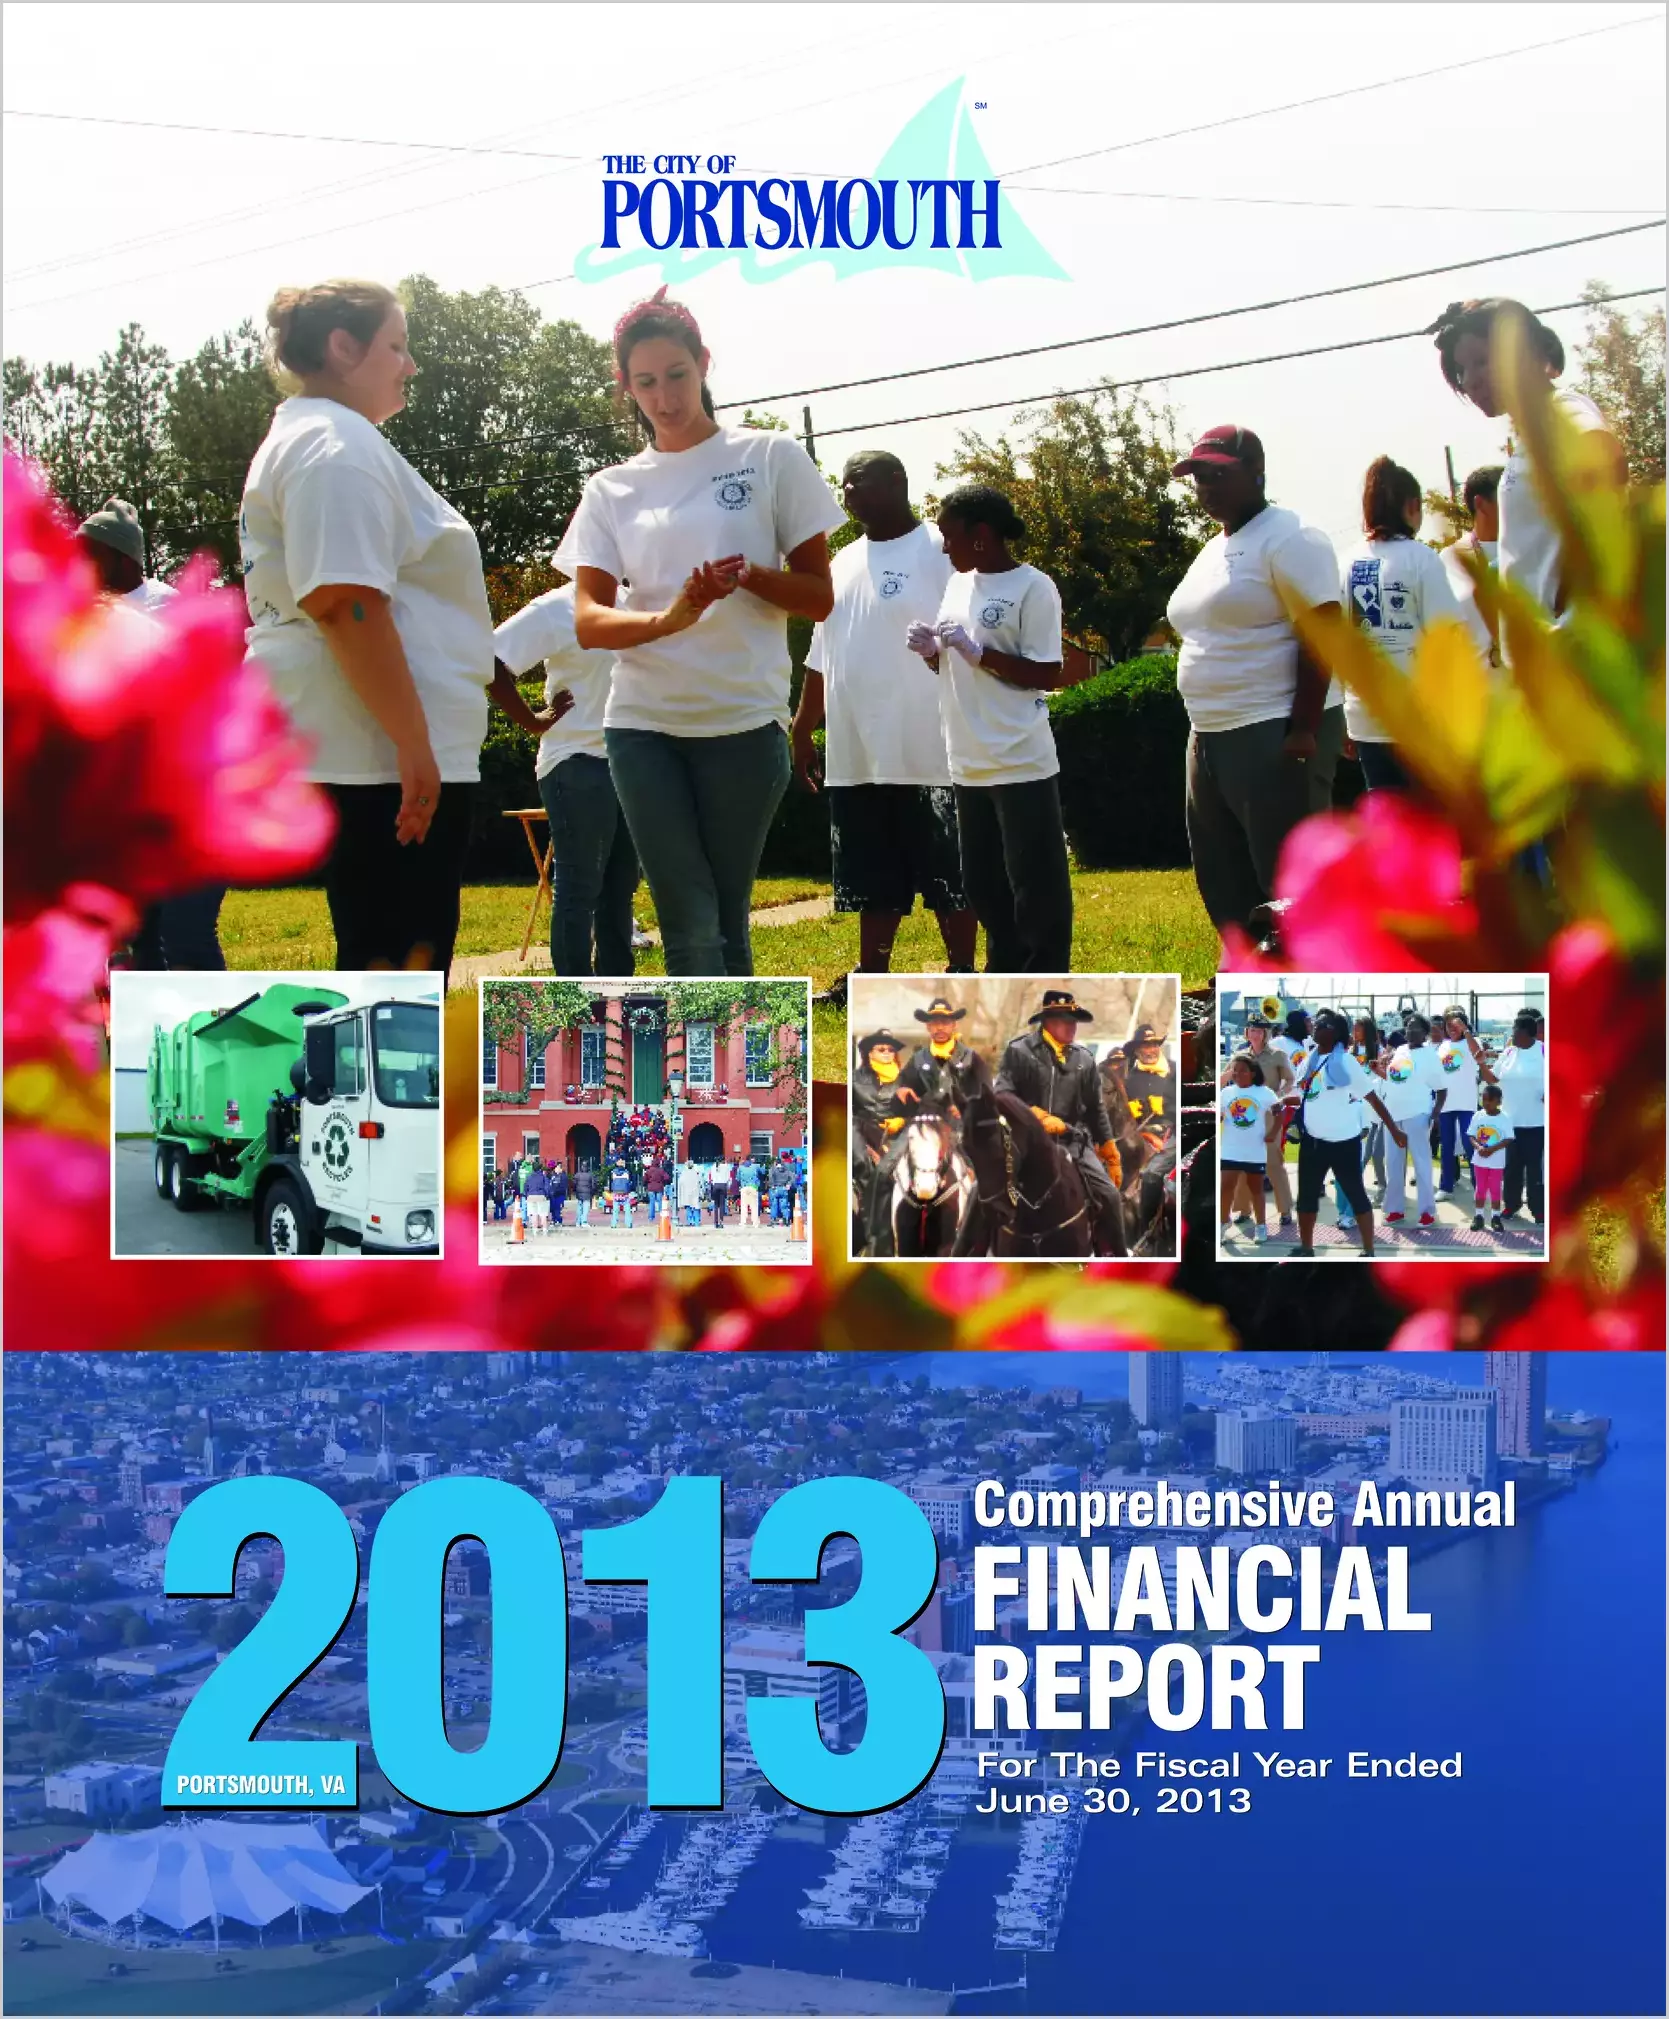 2013 Annual Financial Report for City of Portsmouth